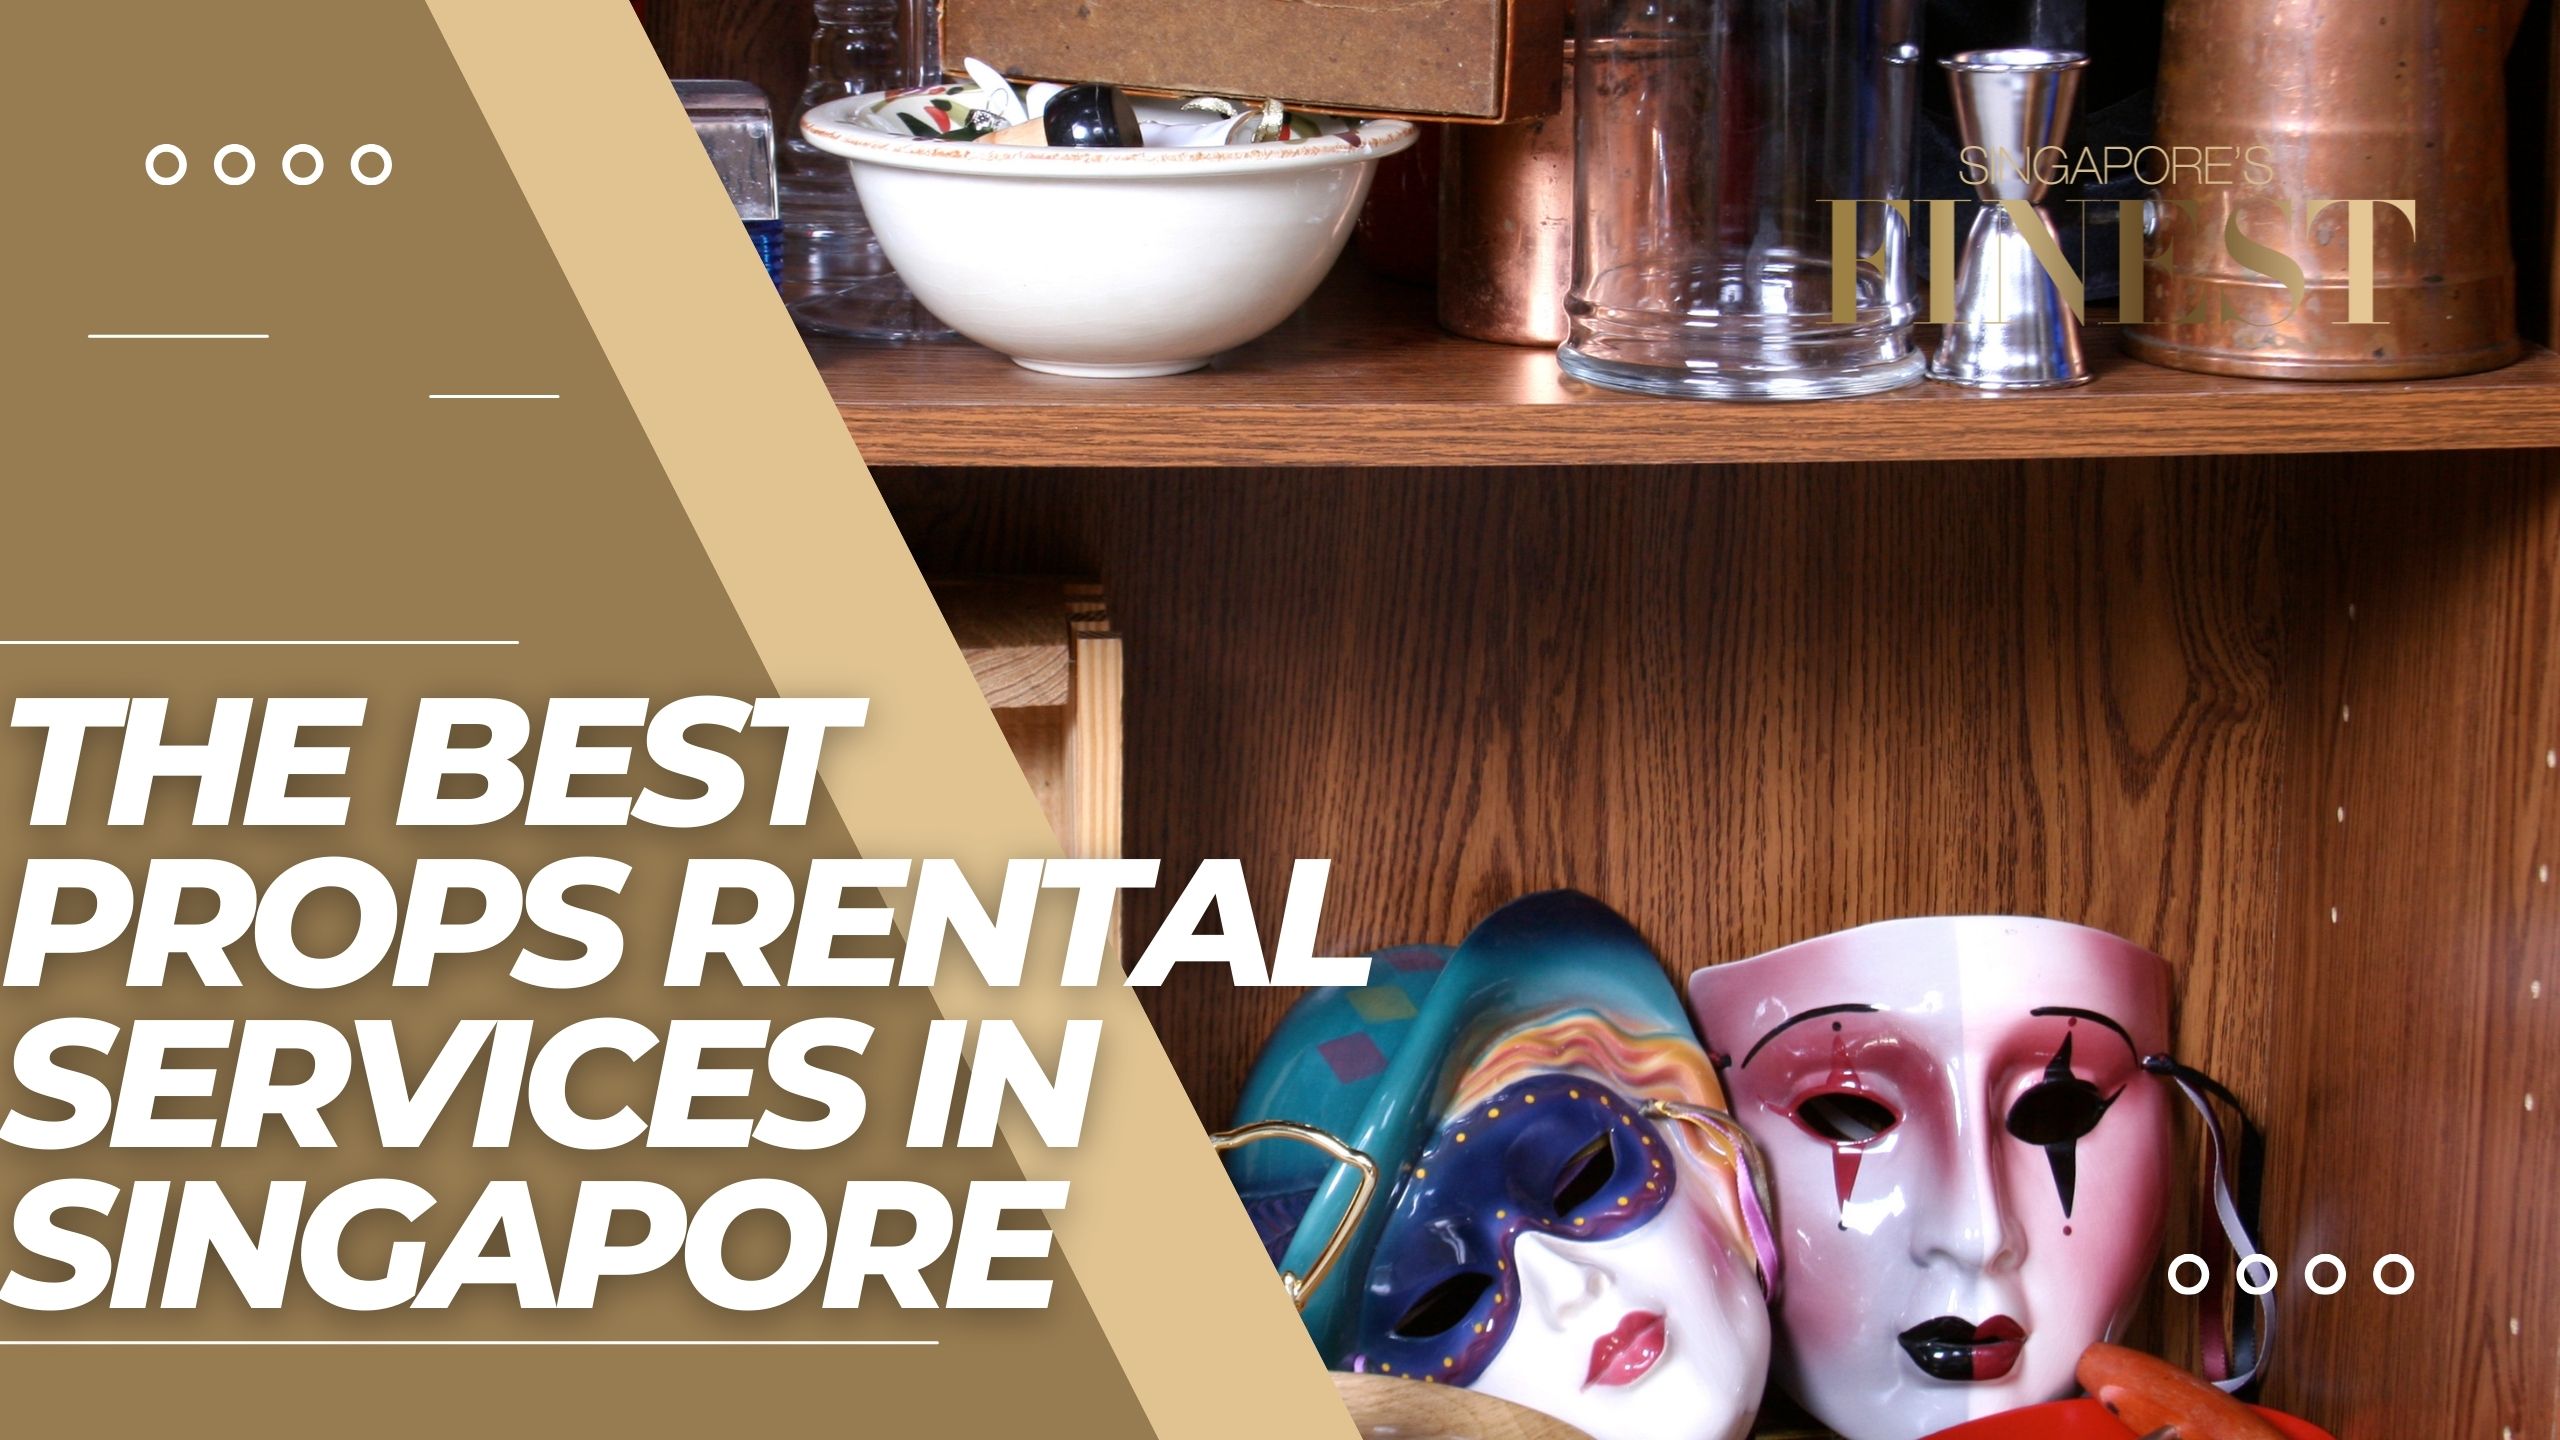 The Finest Props Rental Services in Singapore